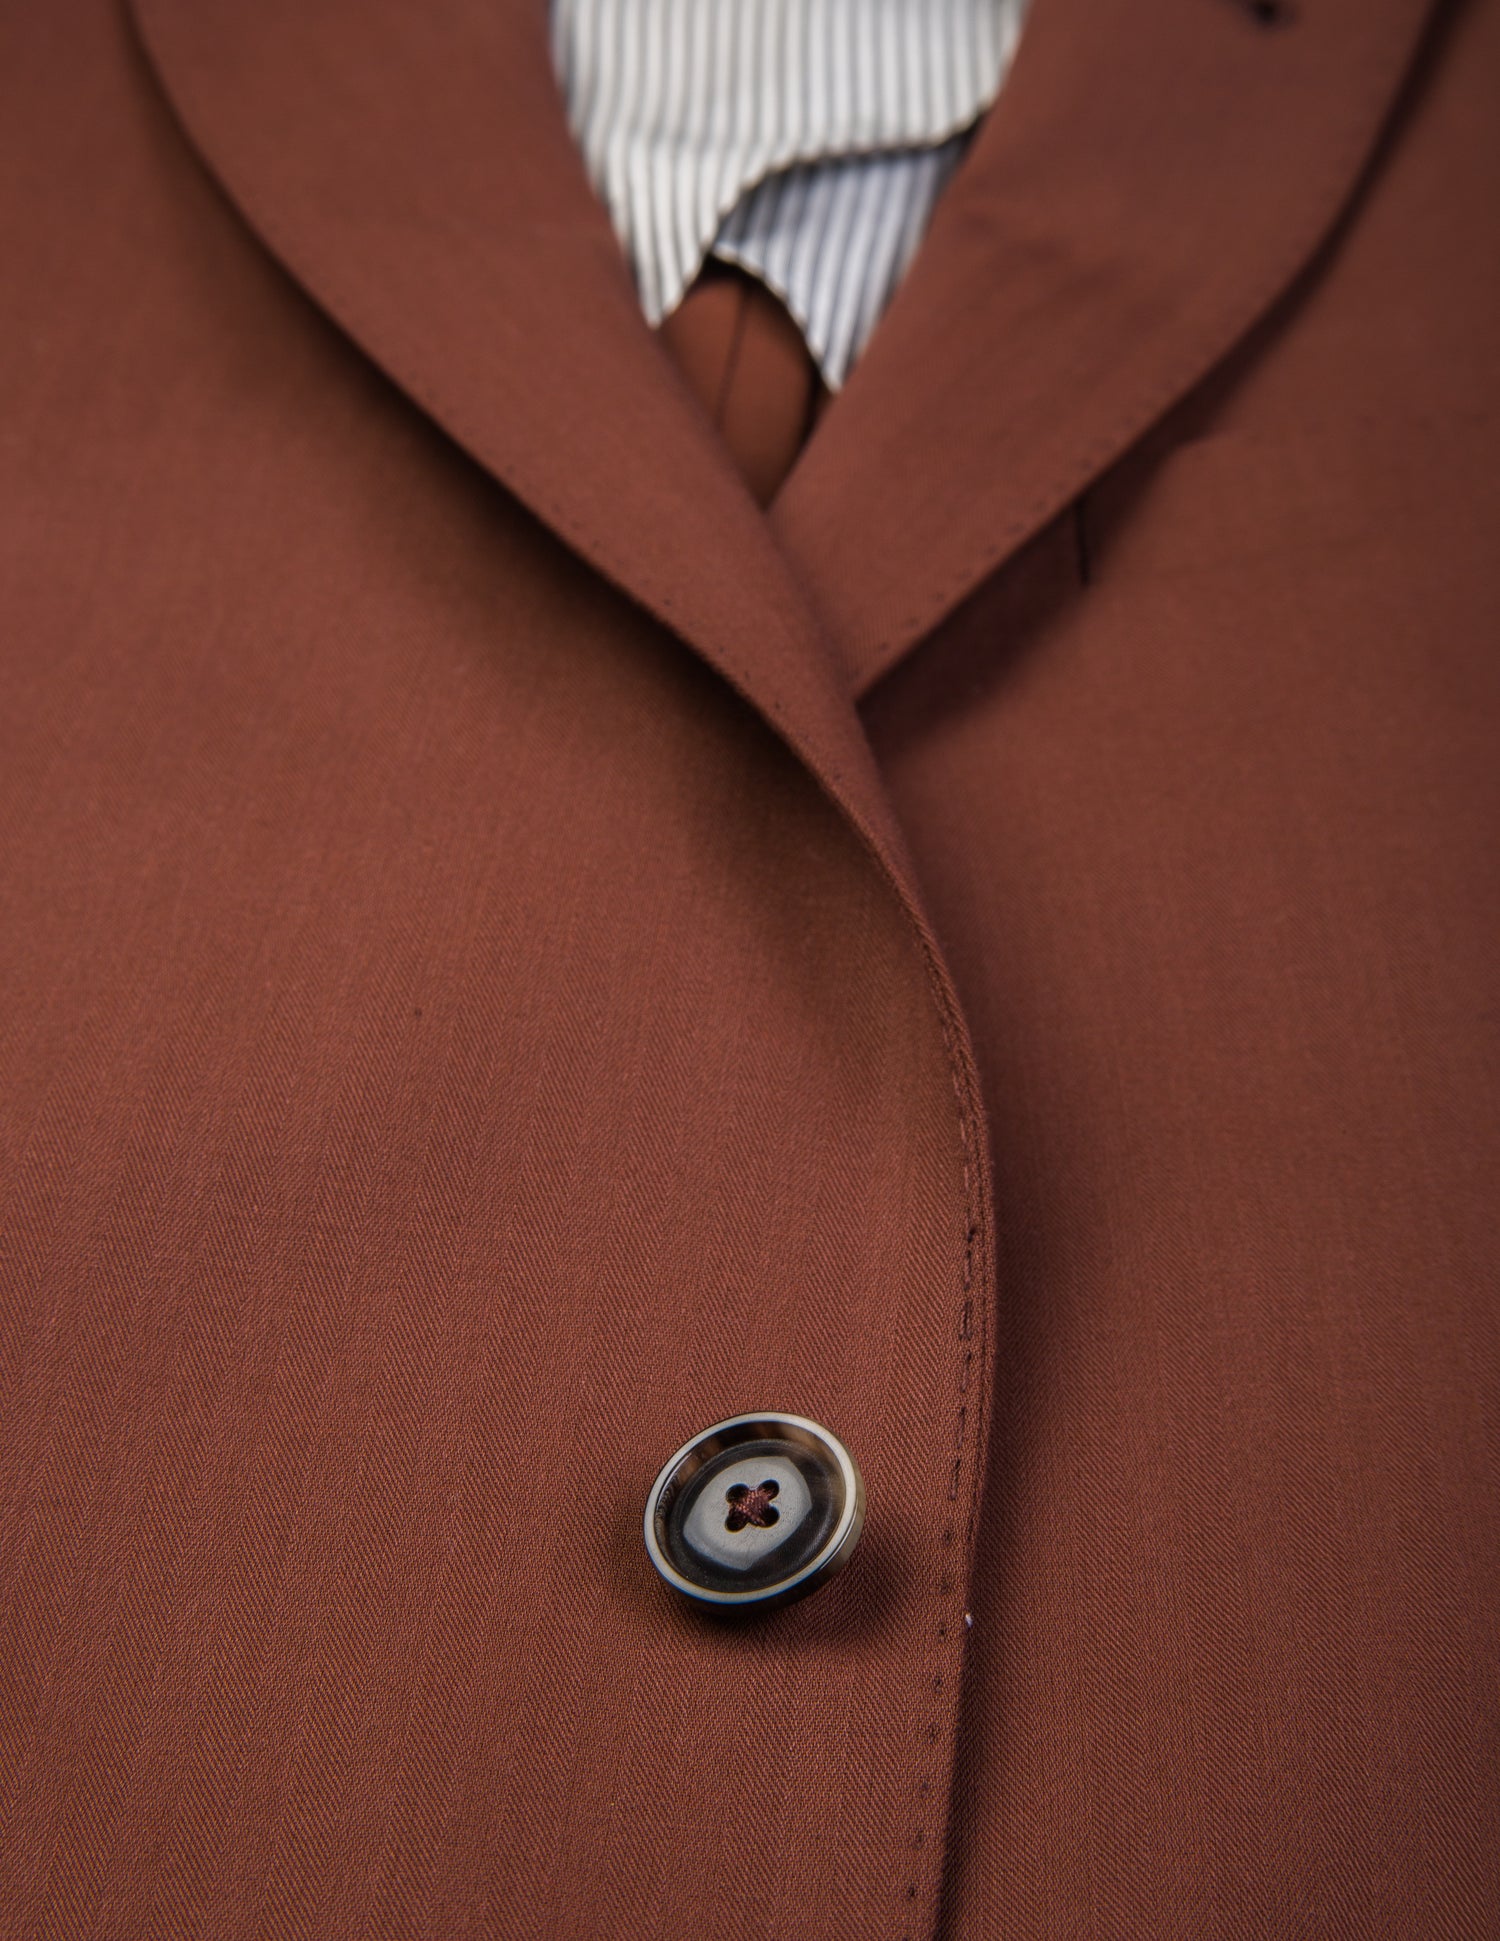 Detail shot of Brooklyn Tailors BKT50 Tailored Jacket in Herringbone Wool/Cotton - Brick showing button and fabric texture